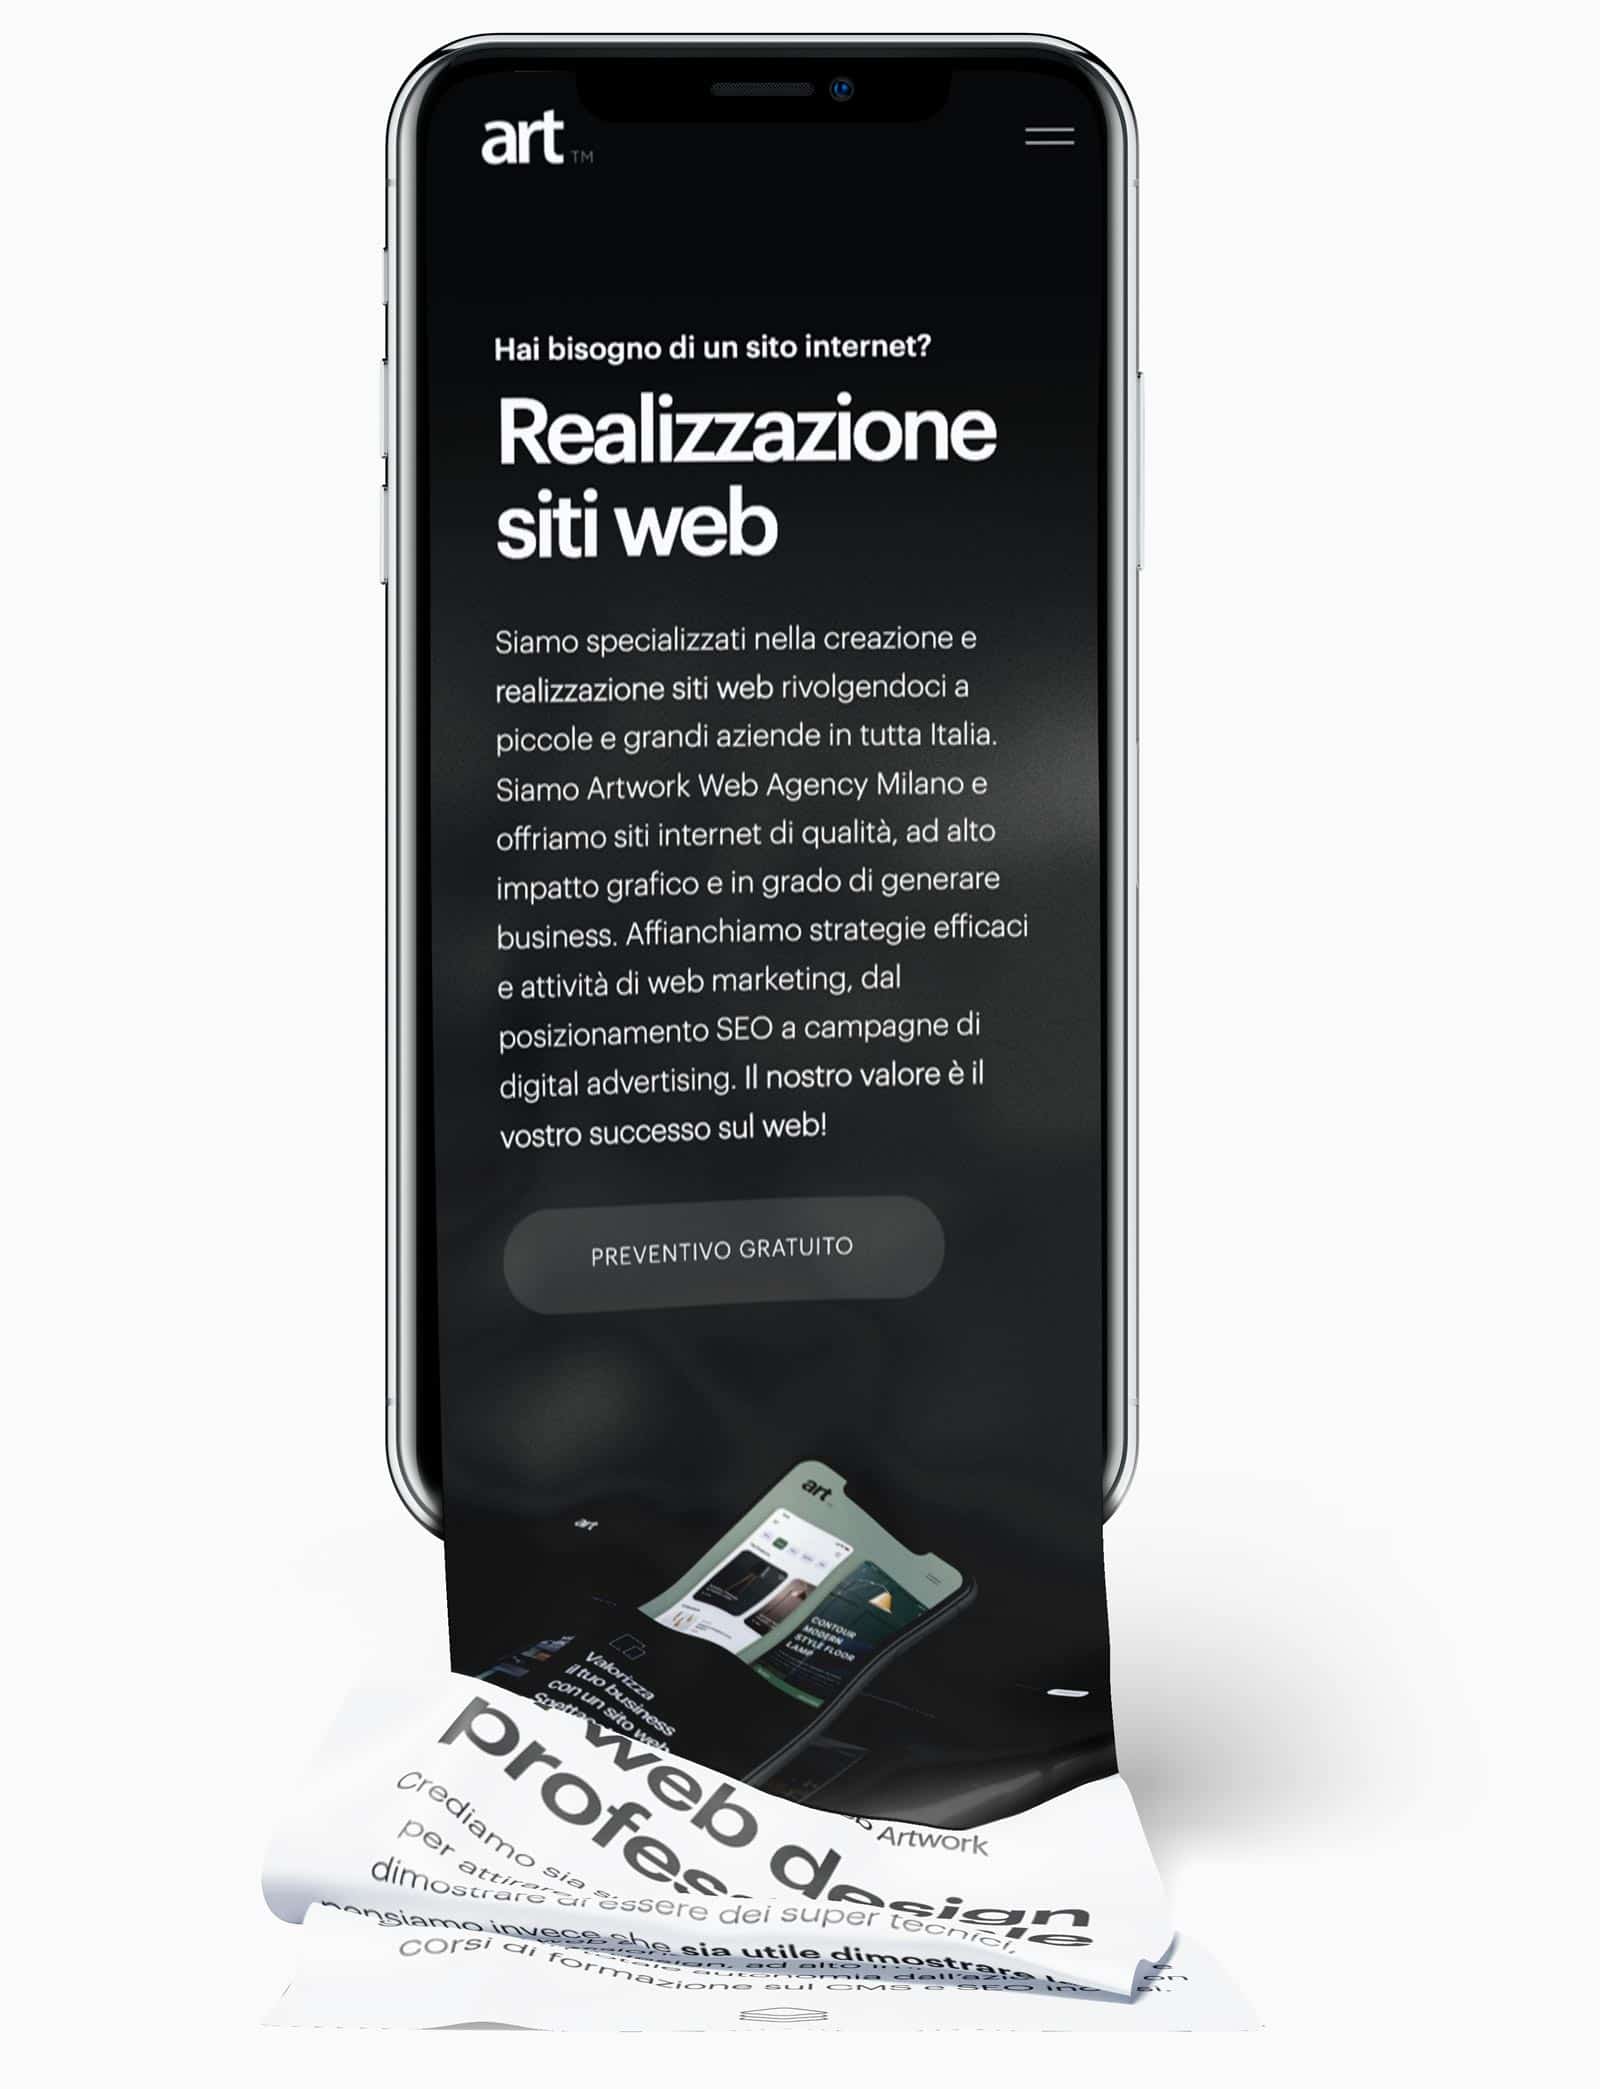 restyling sito web